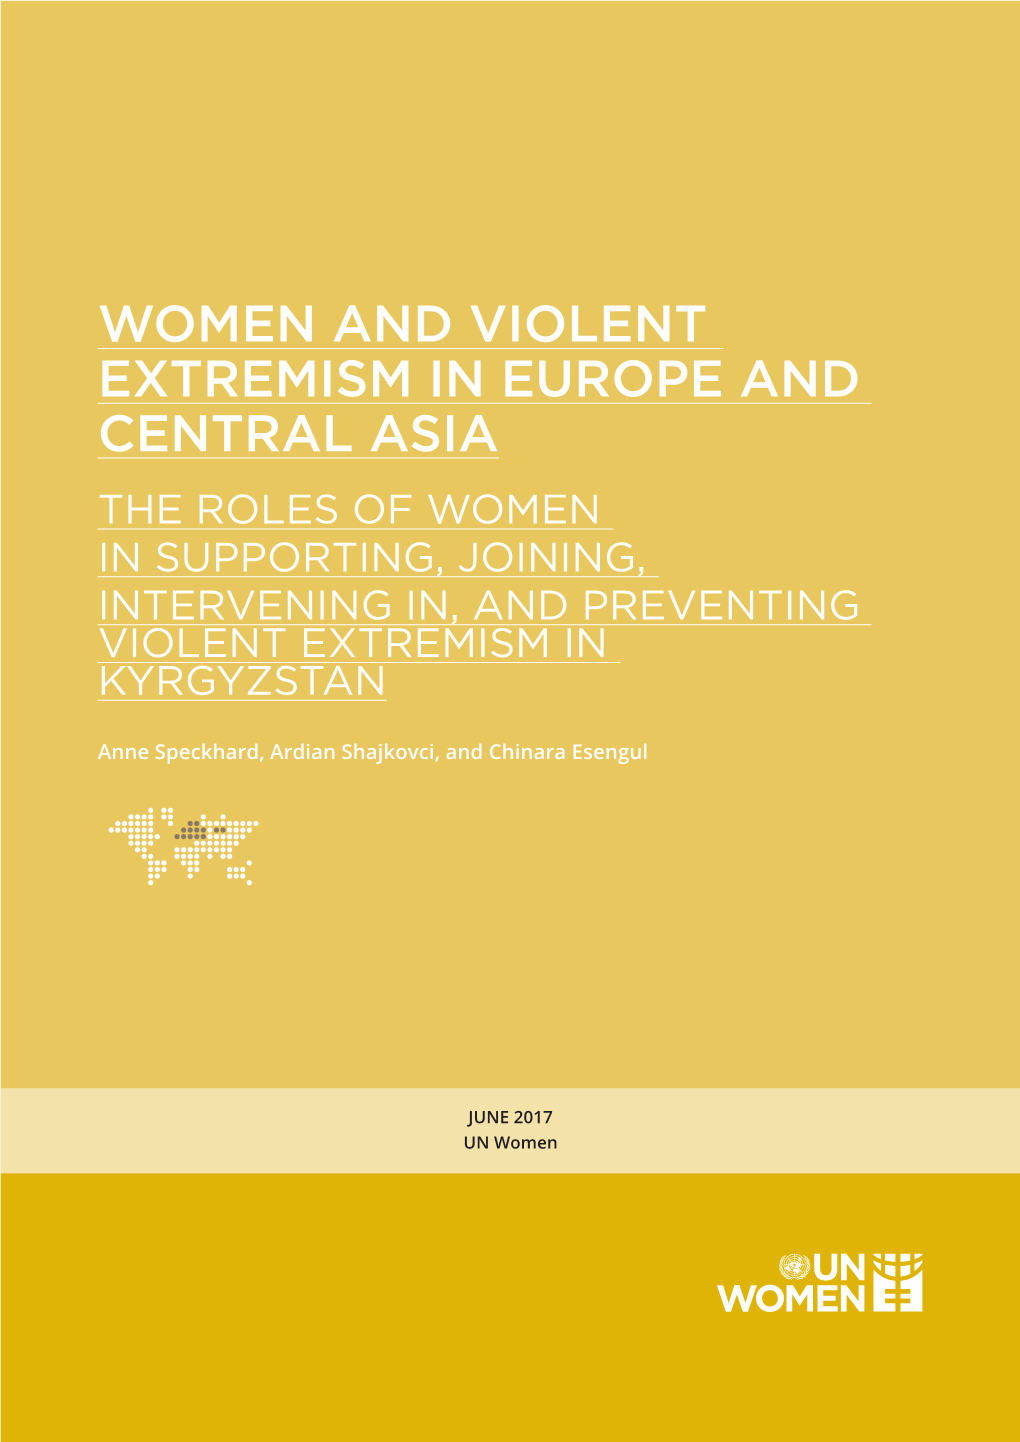 Women and Violent Extremism in Europe and Central Asia the Roles of Women in Supporting, Joining, Intervening In, and Preventing Violent Extremism in Kyrgyzstan